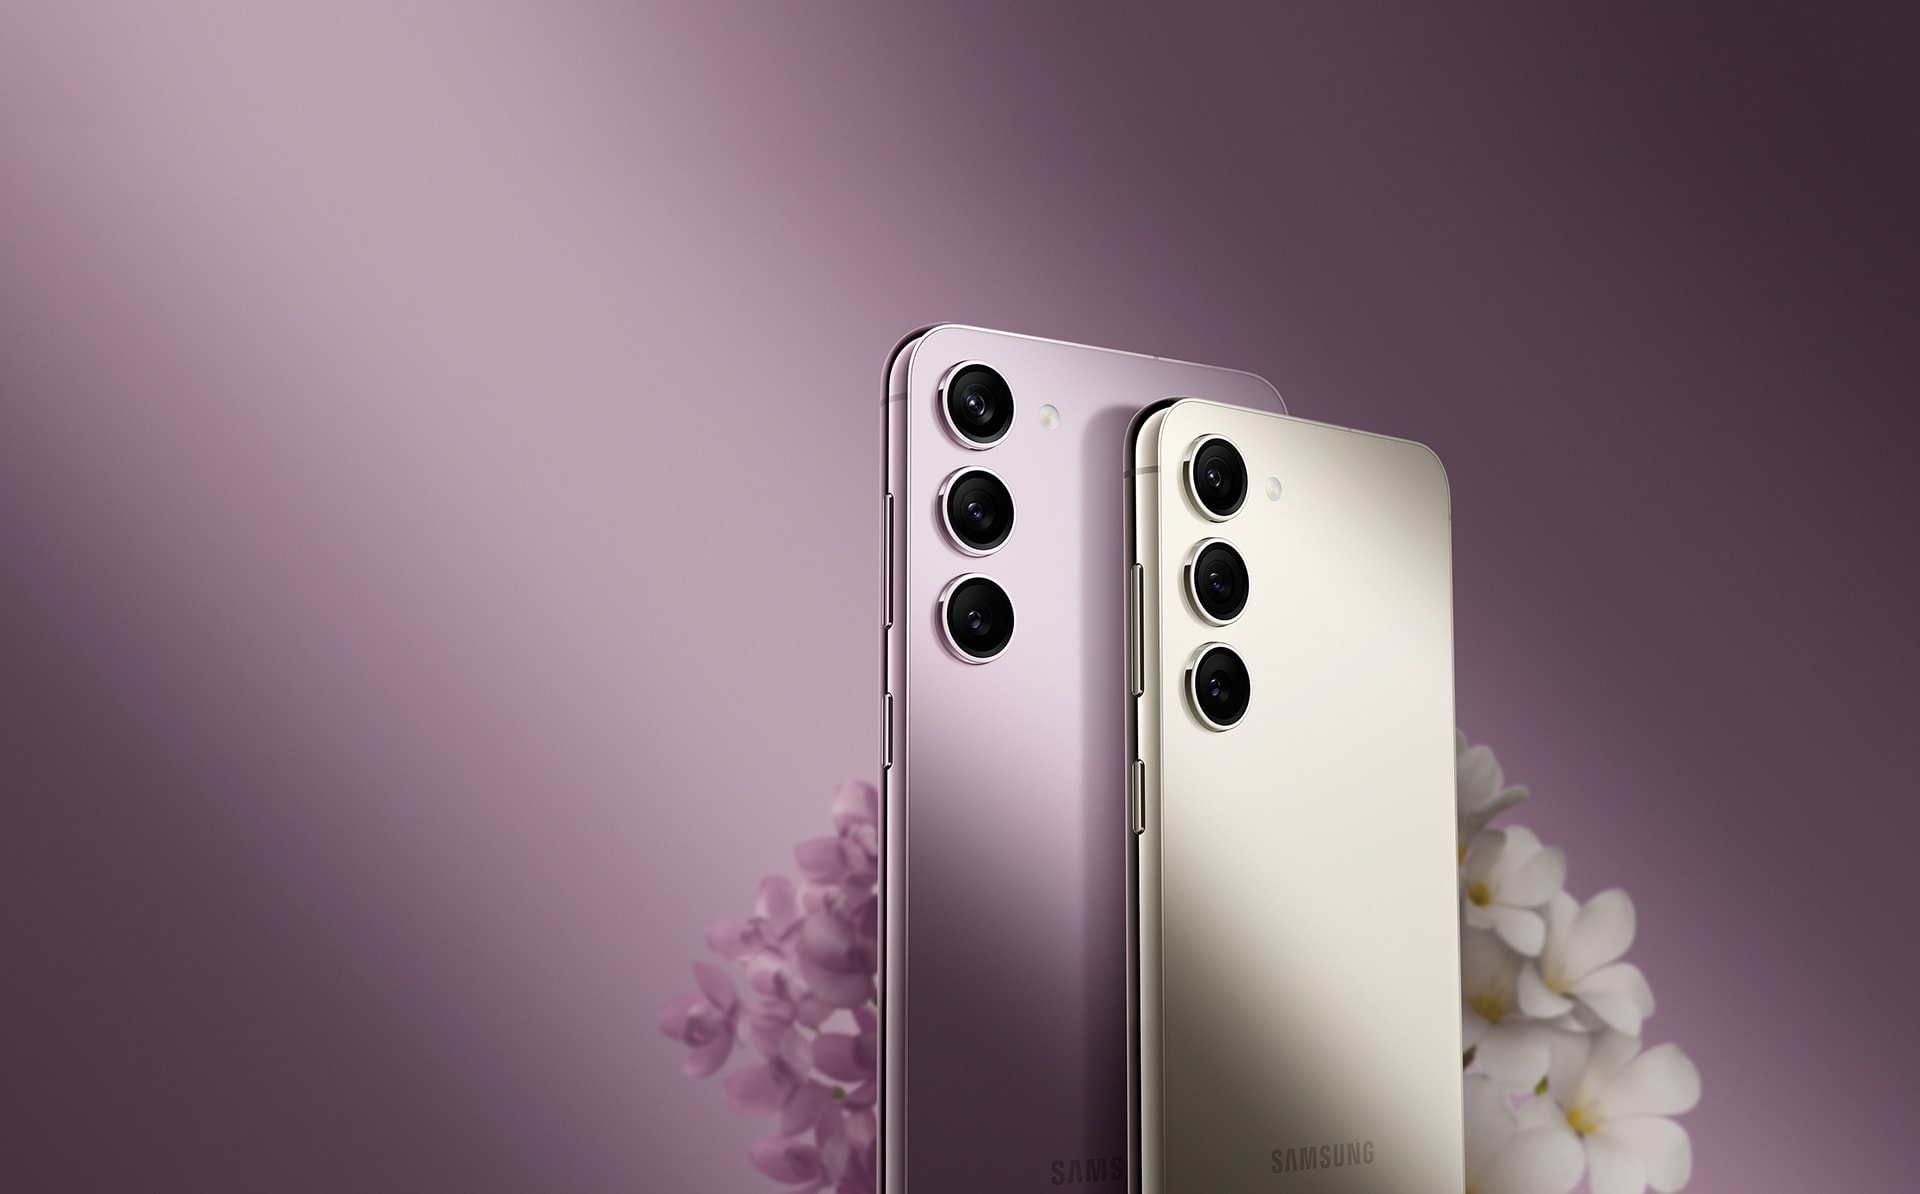 Galaxy S23 in Cream and S23 plus in Lavender are side by side and seen from the rear at a slight angle that shows the metal frame on the side.